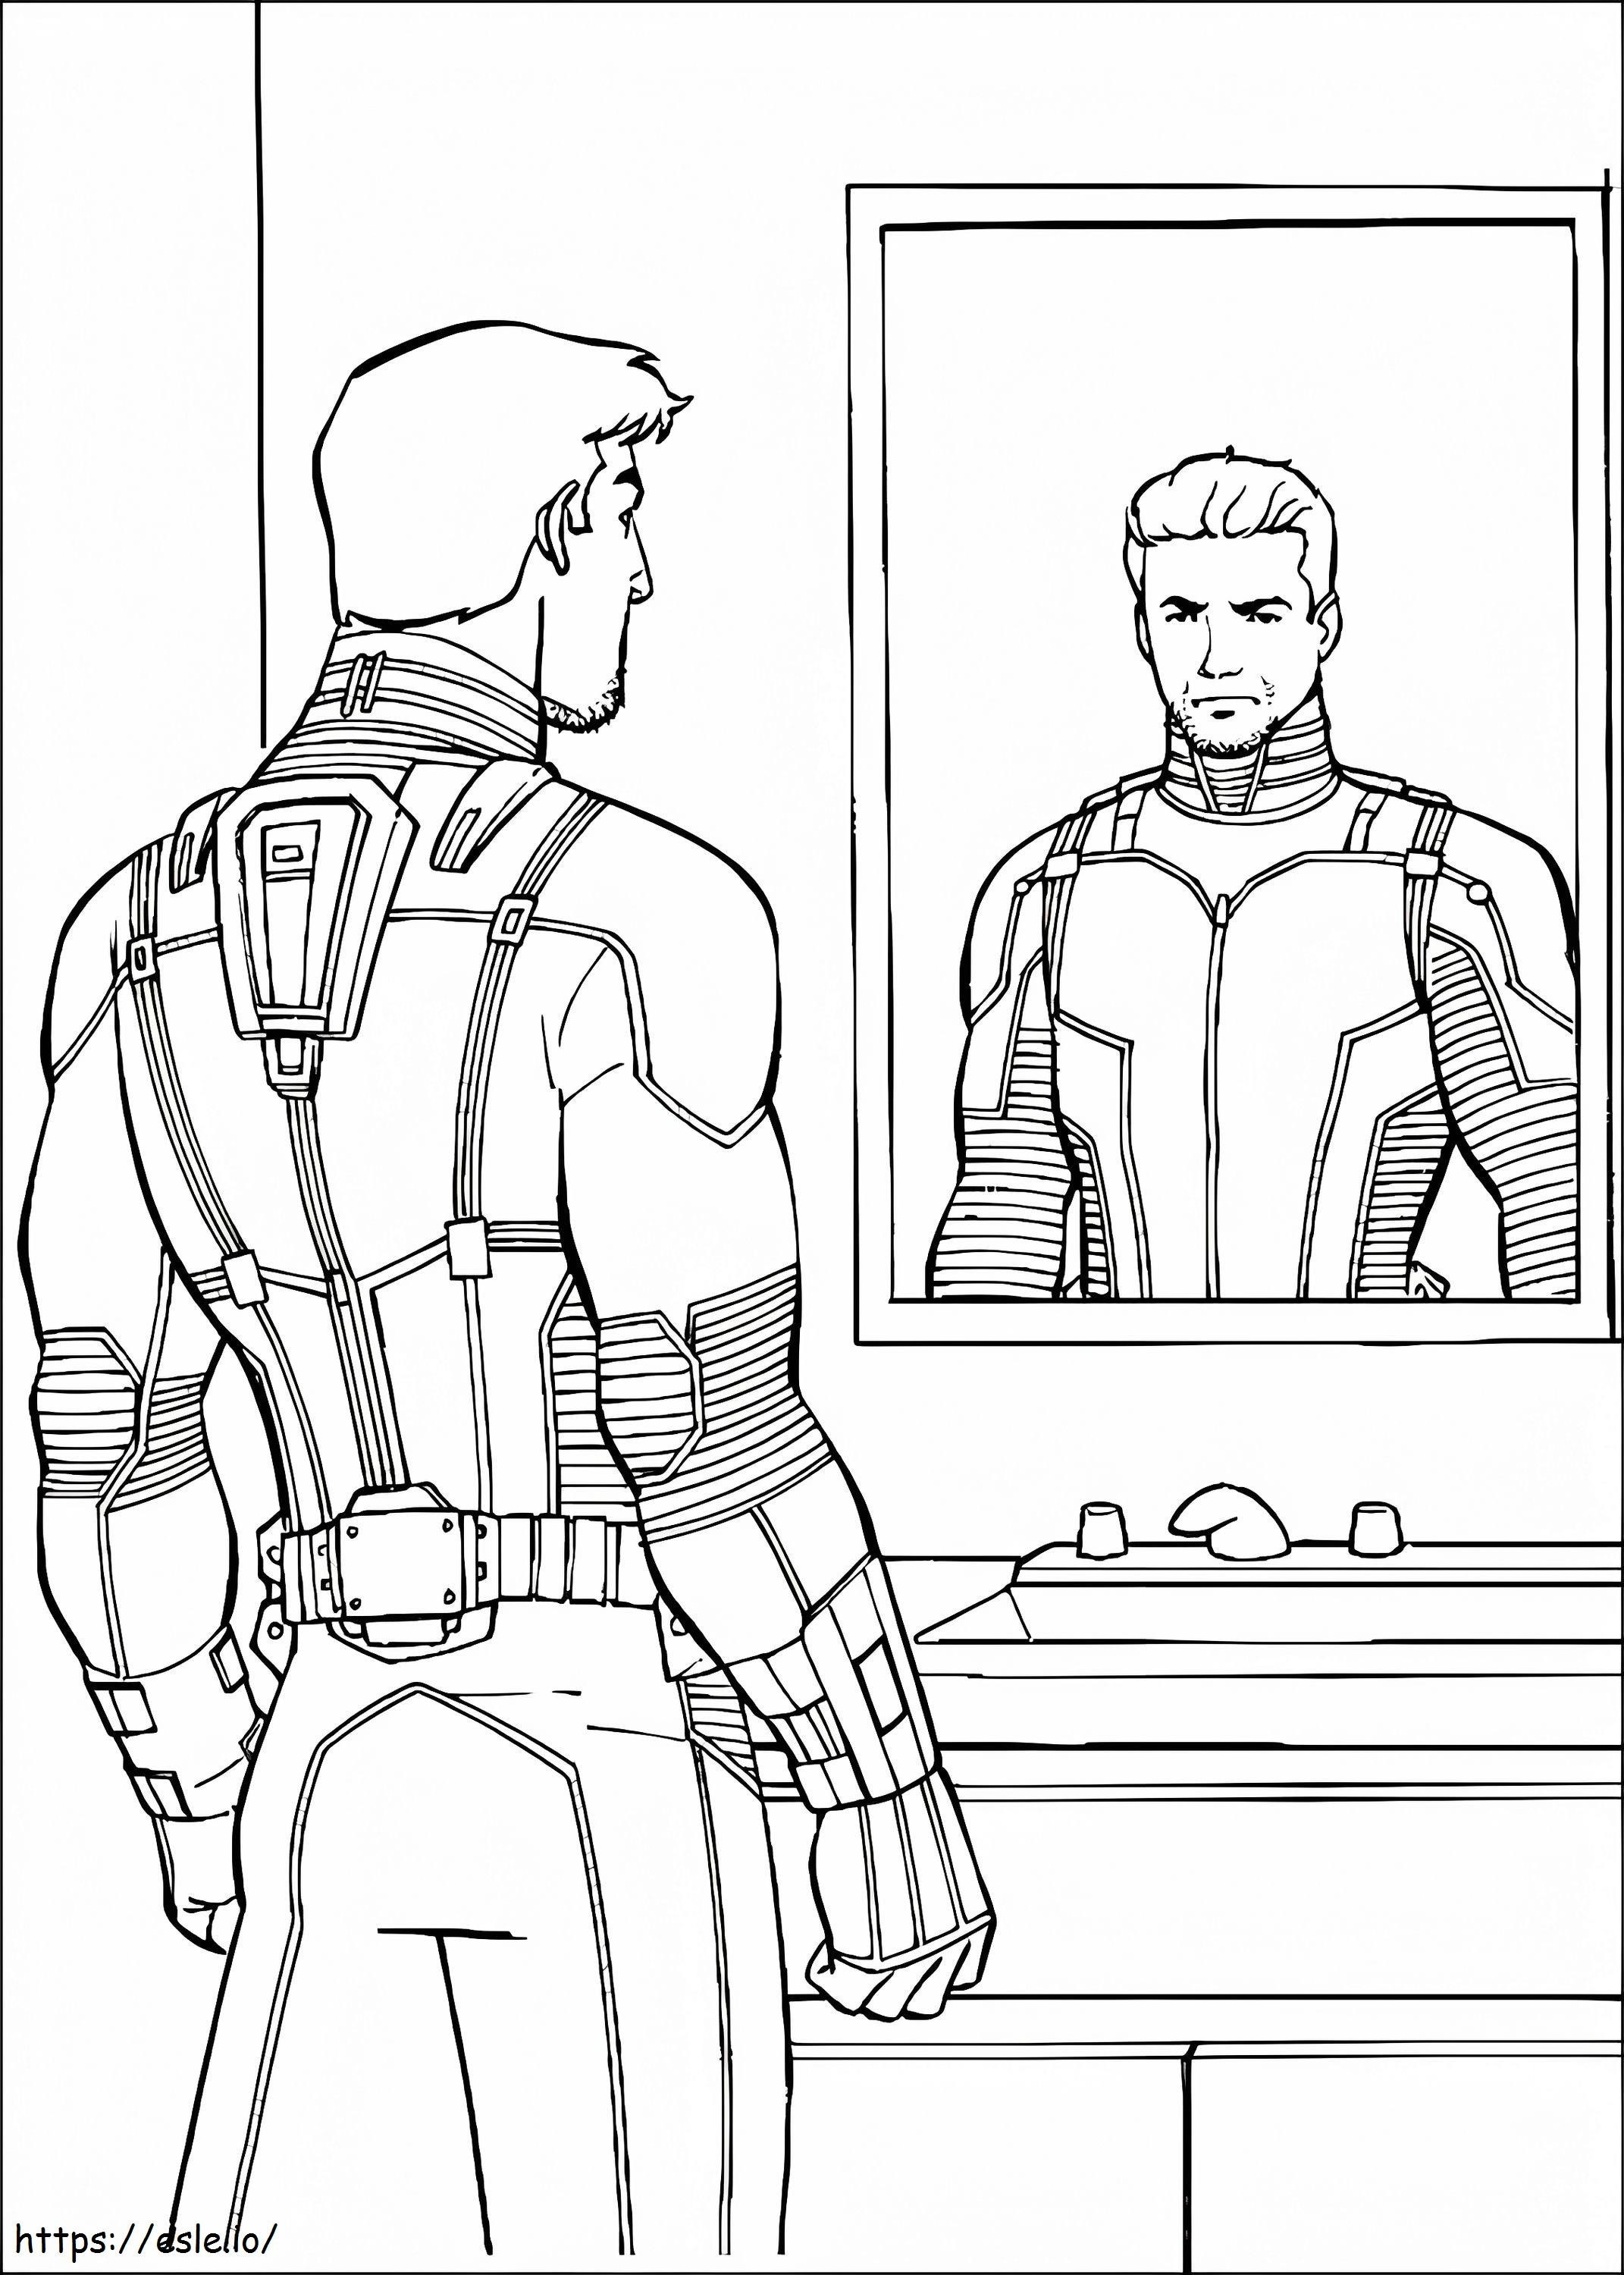 1533355810 Ant Man In Front Of Mirror A4 coloring page